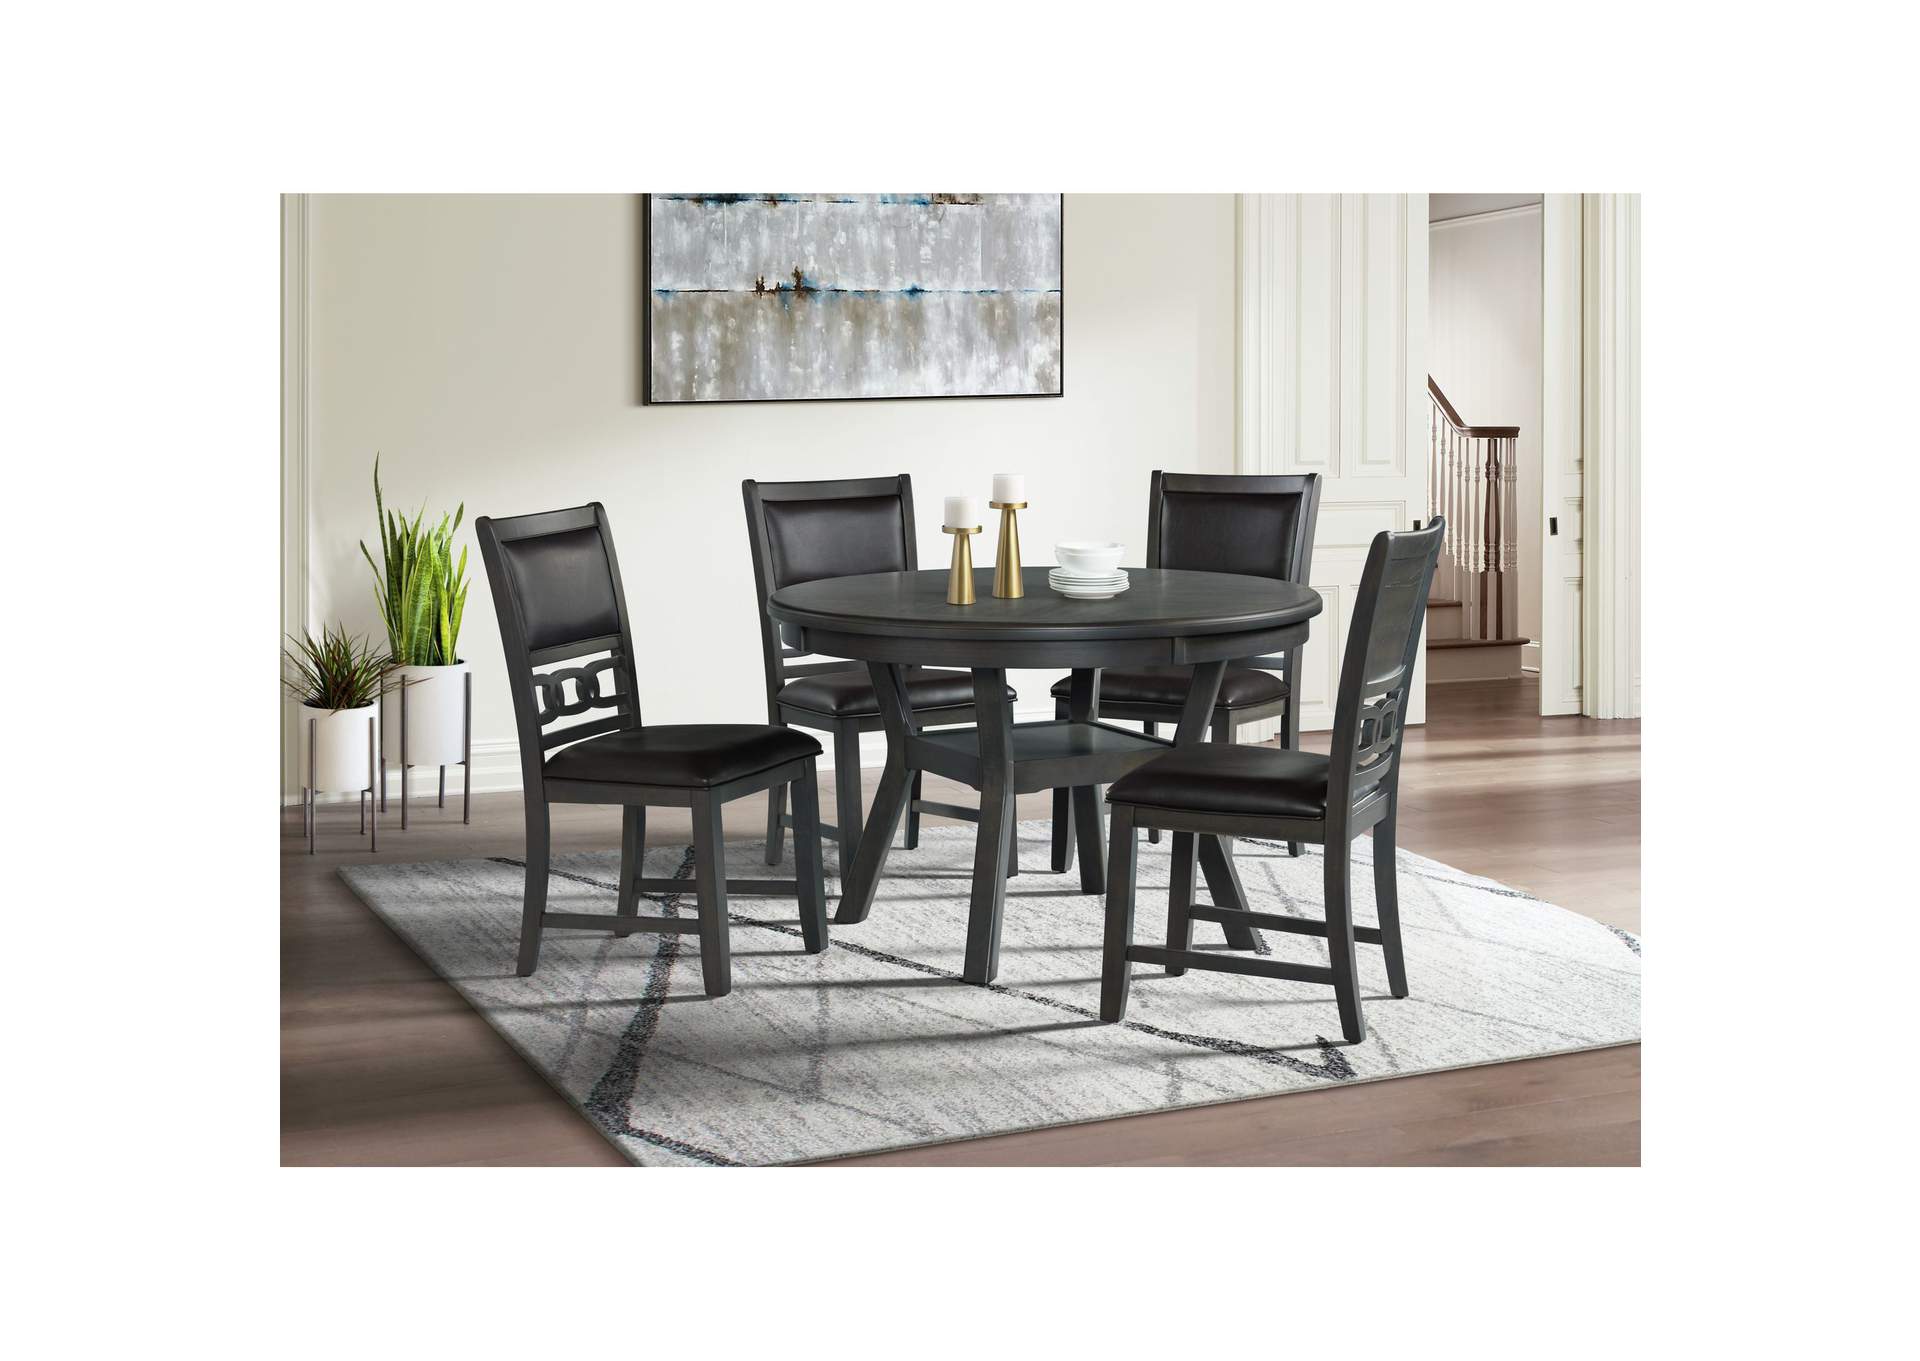 Amherst Dining Table With Wood Leg Grey Finish,Elements